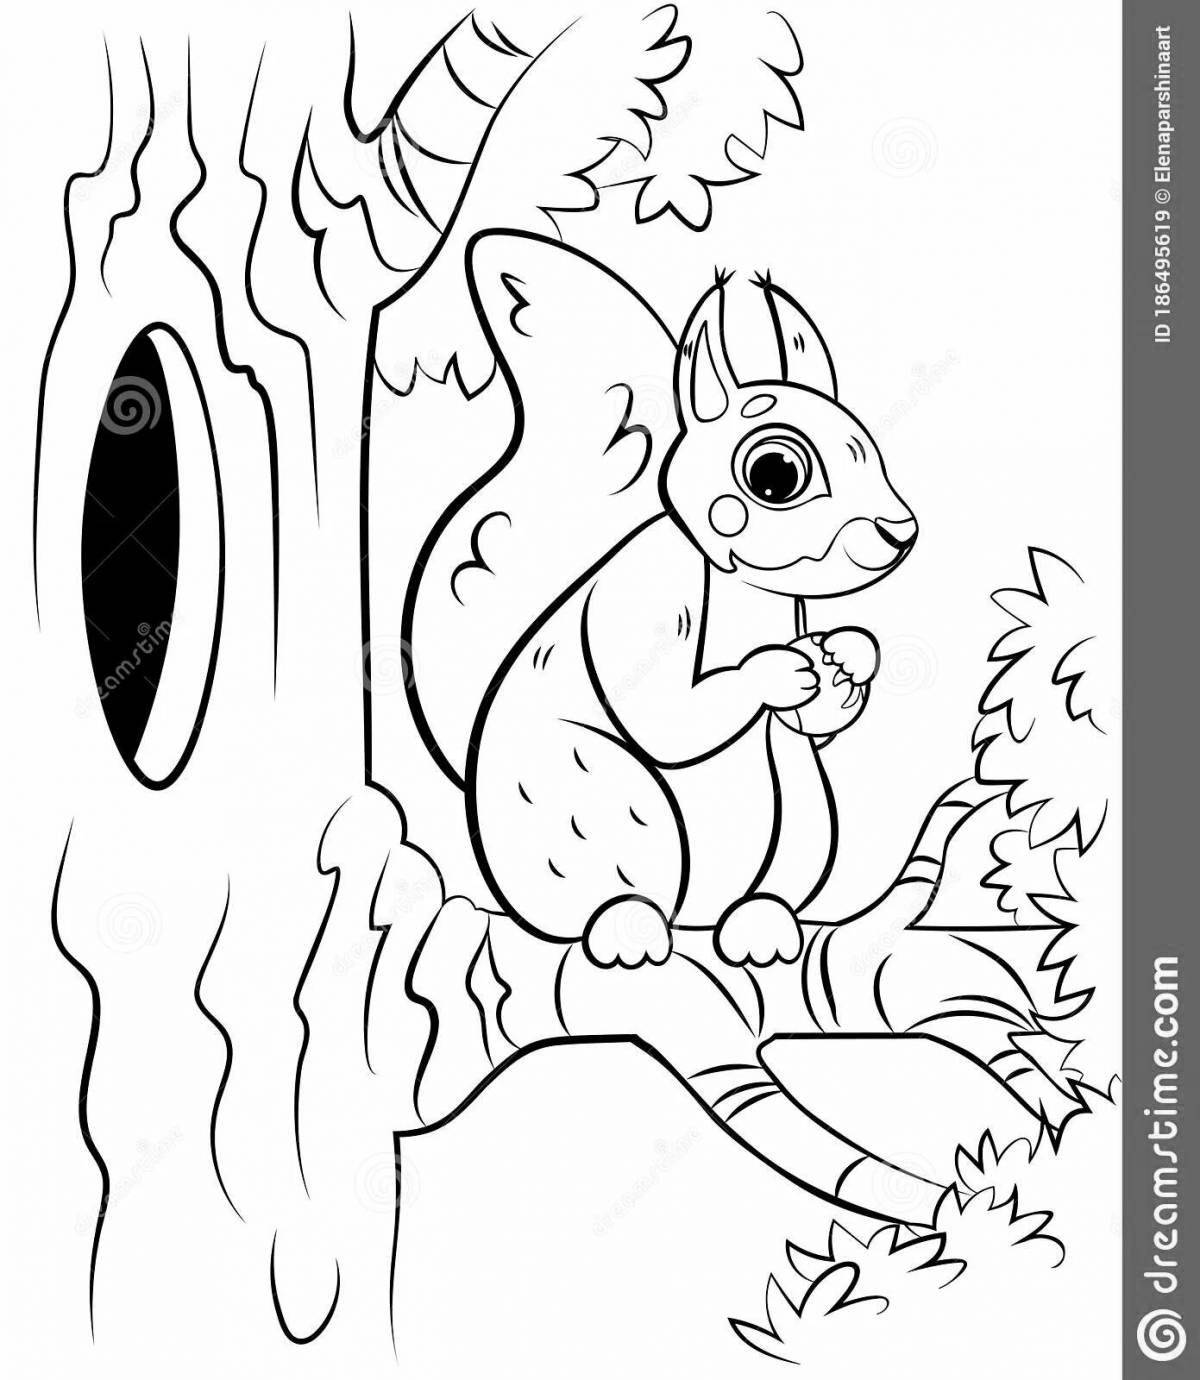 Playful coloring of a squirrel in a hollow